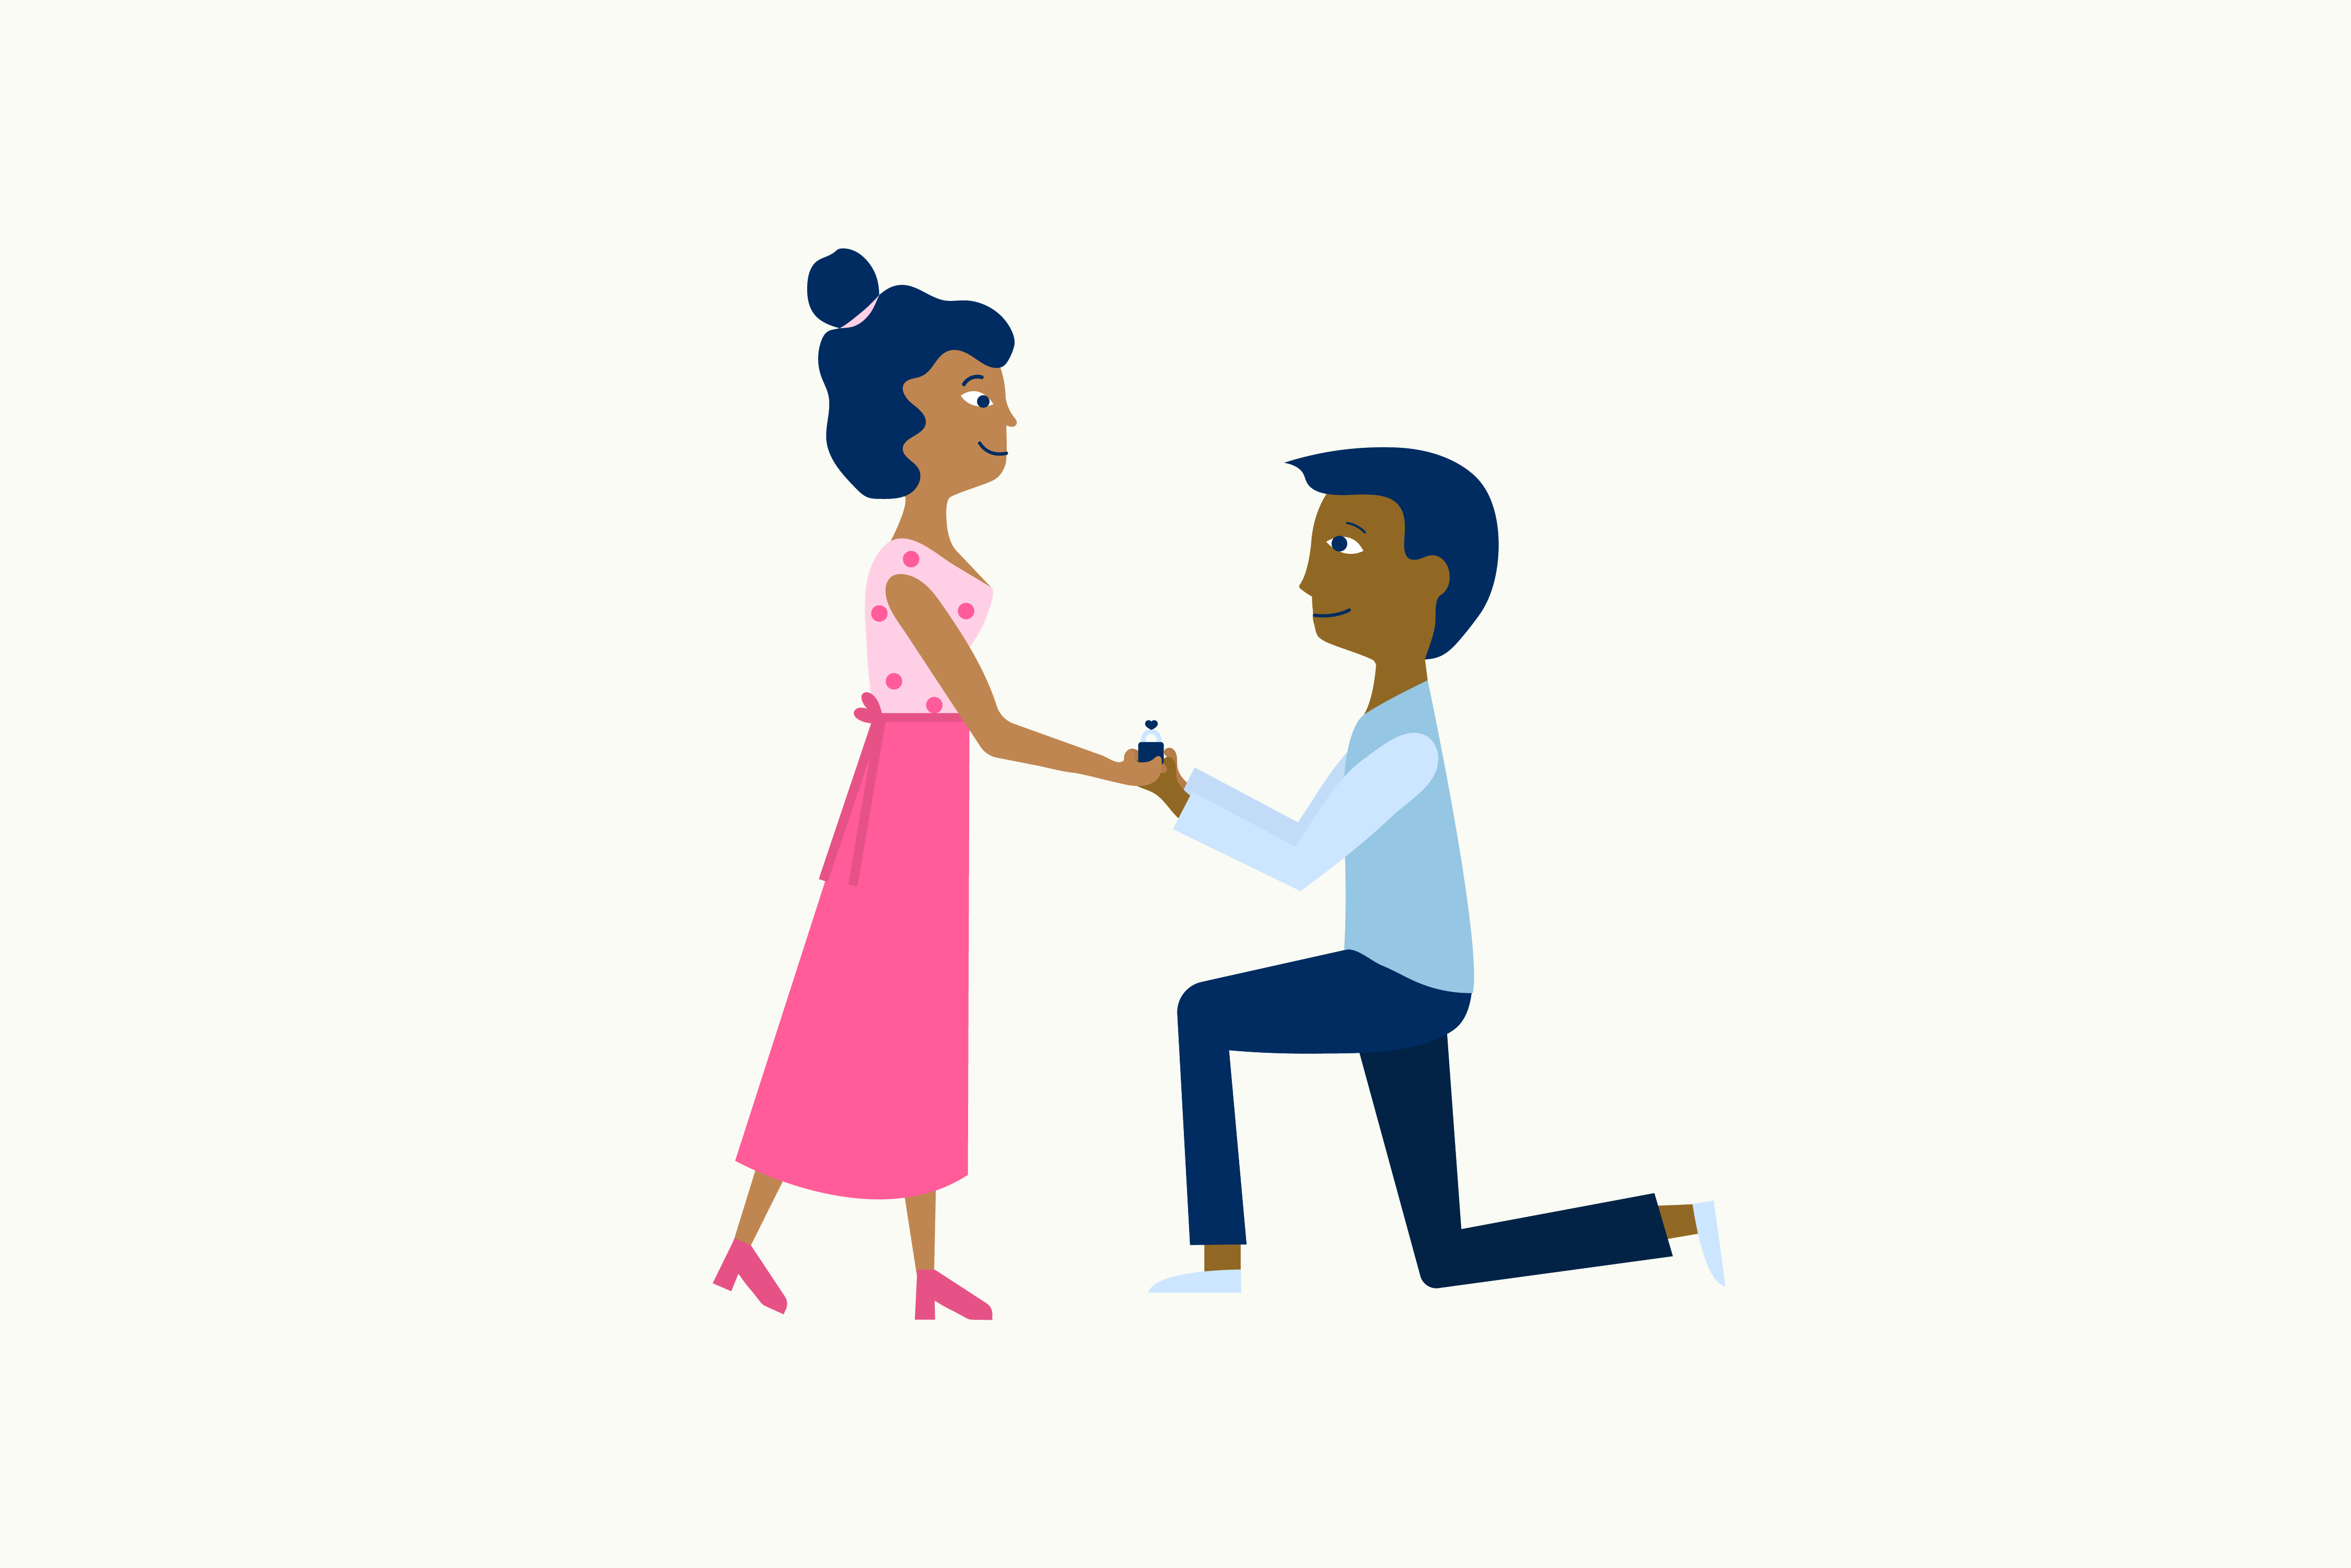 Graphic image of a man proposing to a woman